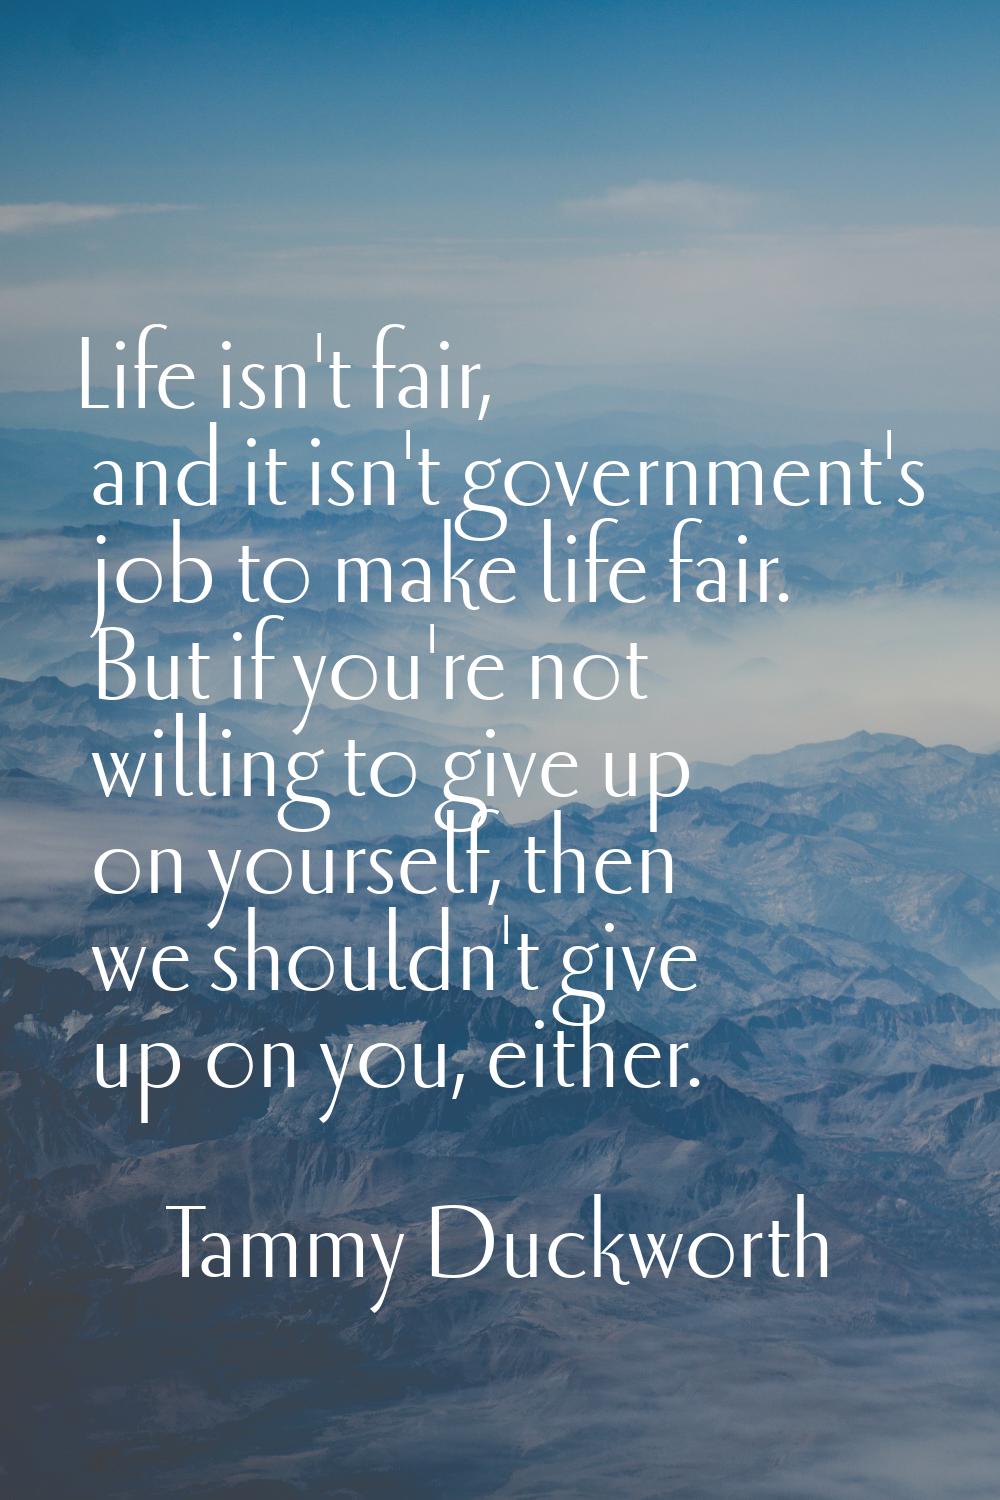 Life isn't fair, and it isn't government's job to make life fair. But if you're not willing to give